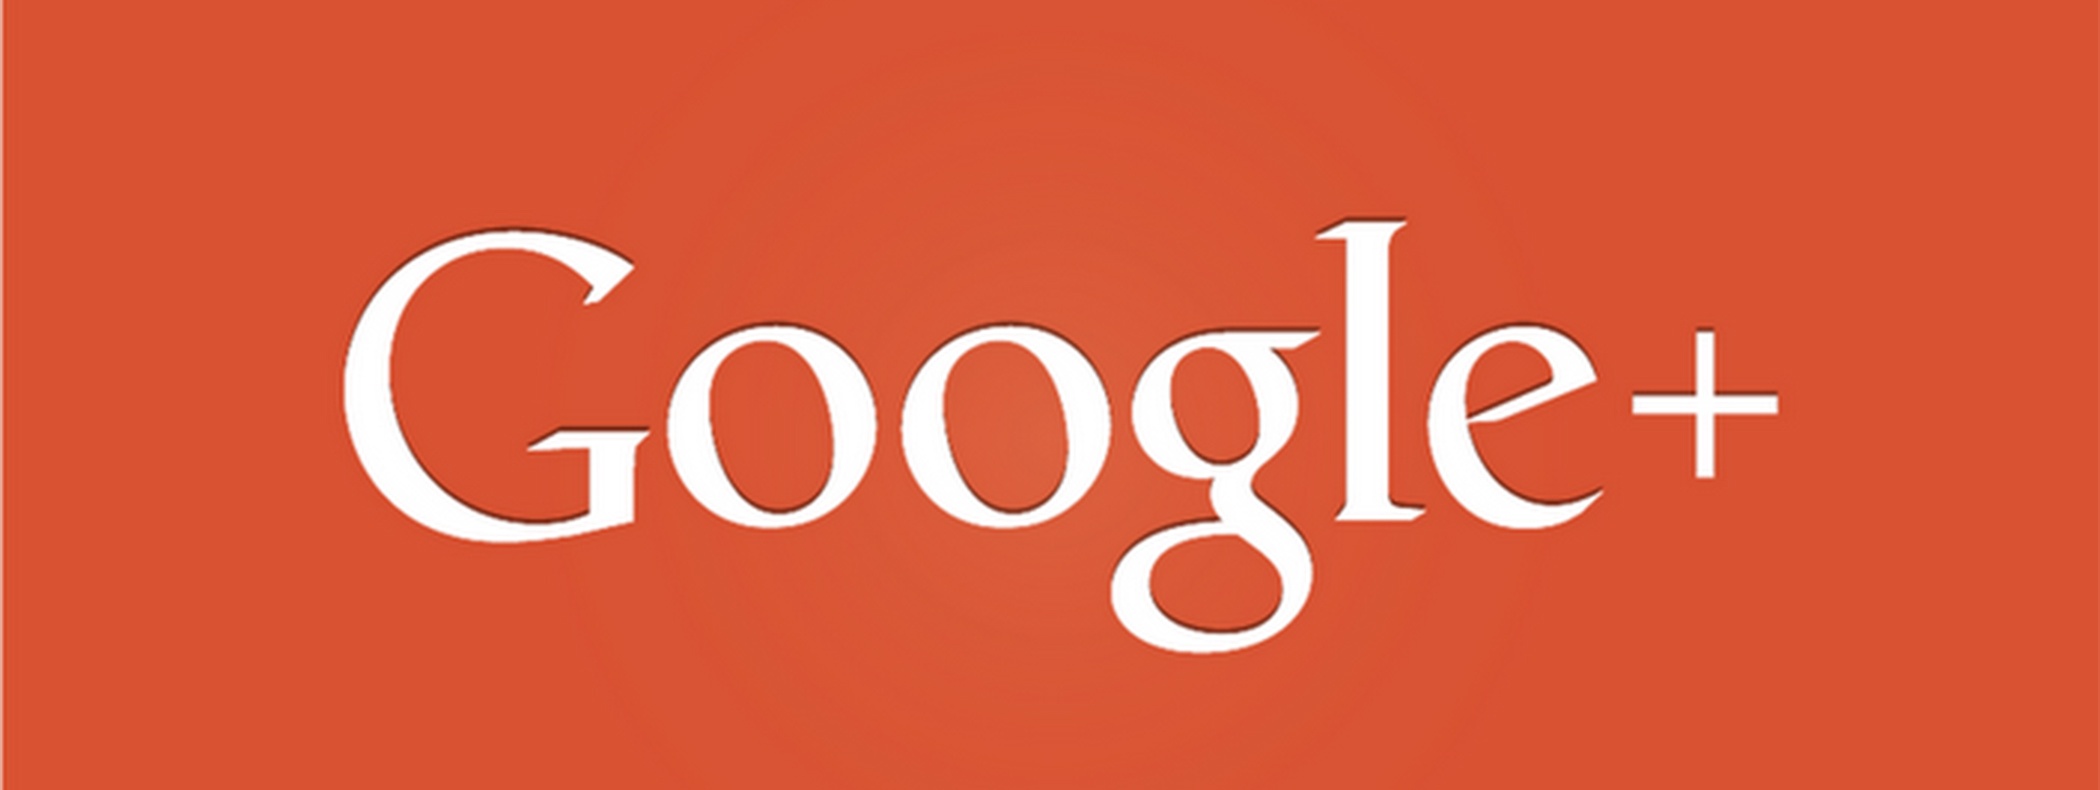 Set Up Your Google+ Business Page in 2 Easy Steps